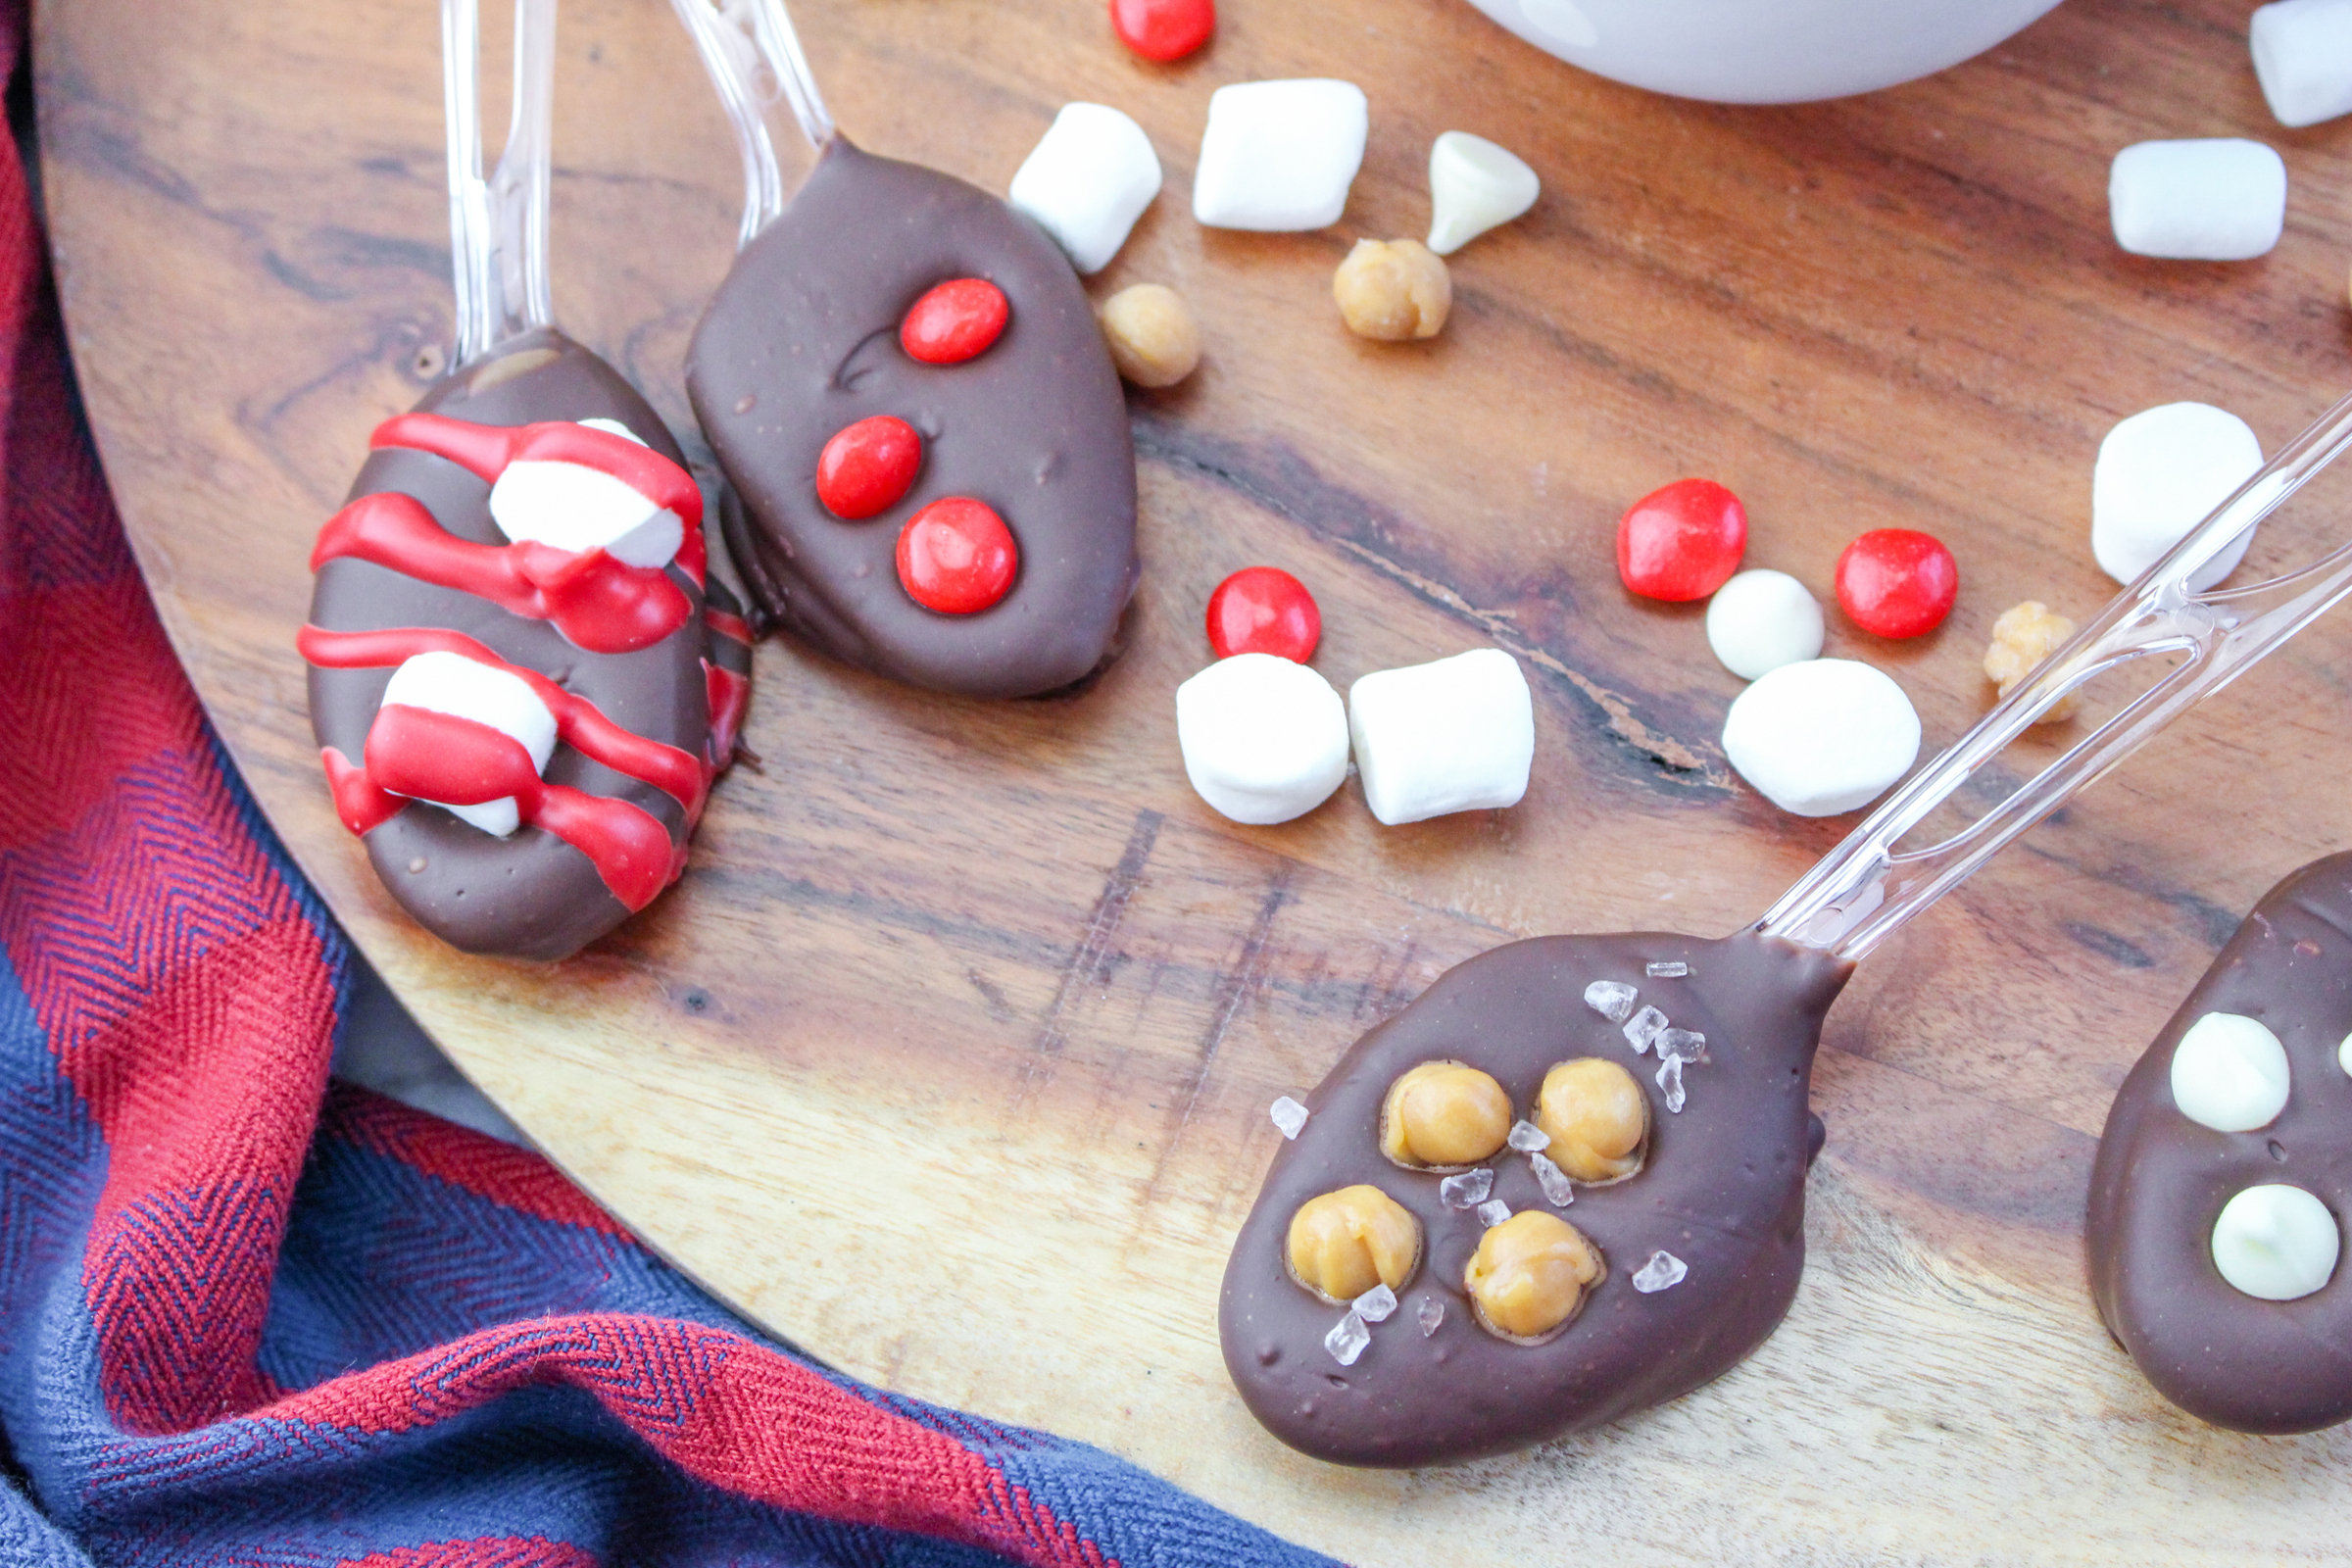 Four hot chocolate spoons on a wooden background with a red and blue cloth.